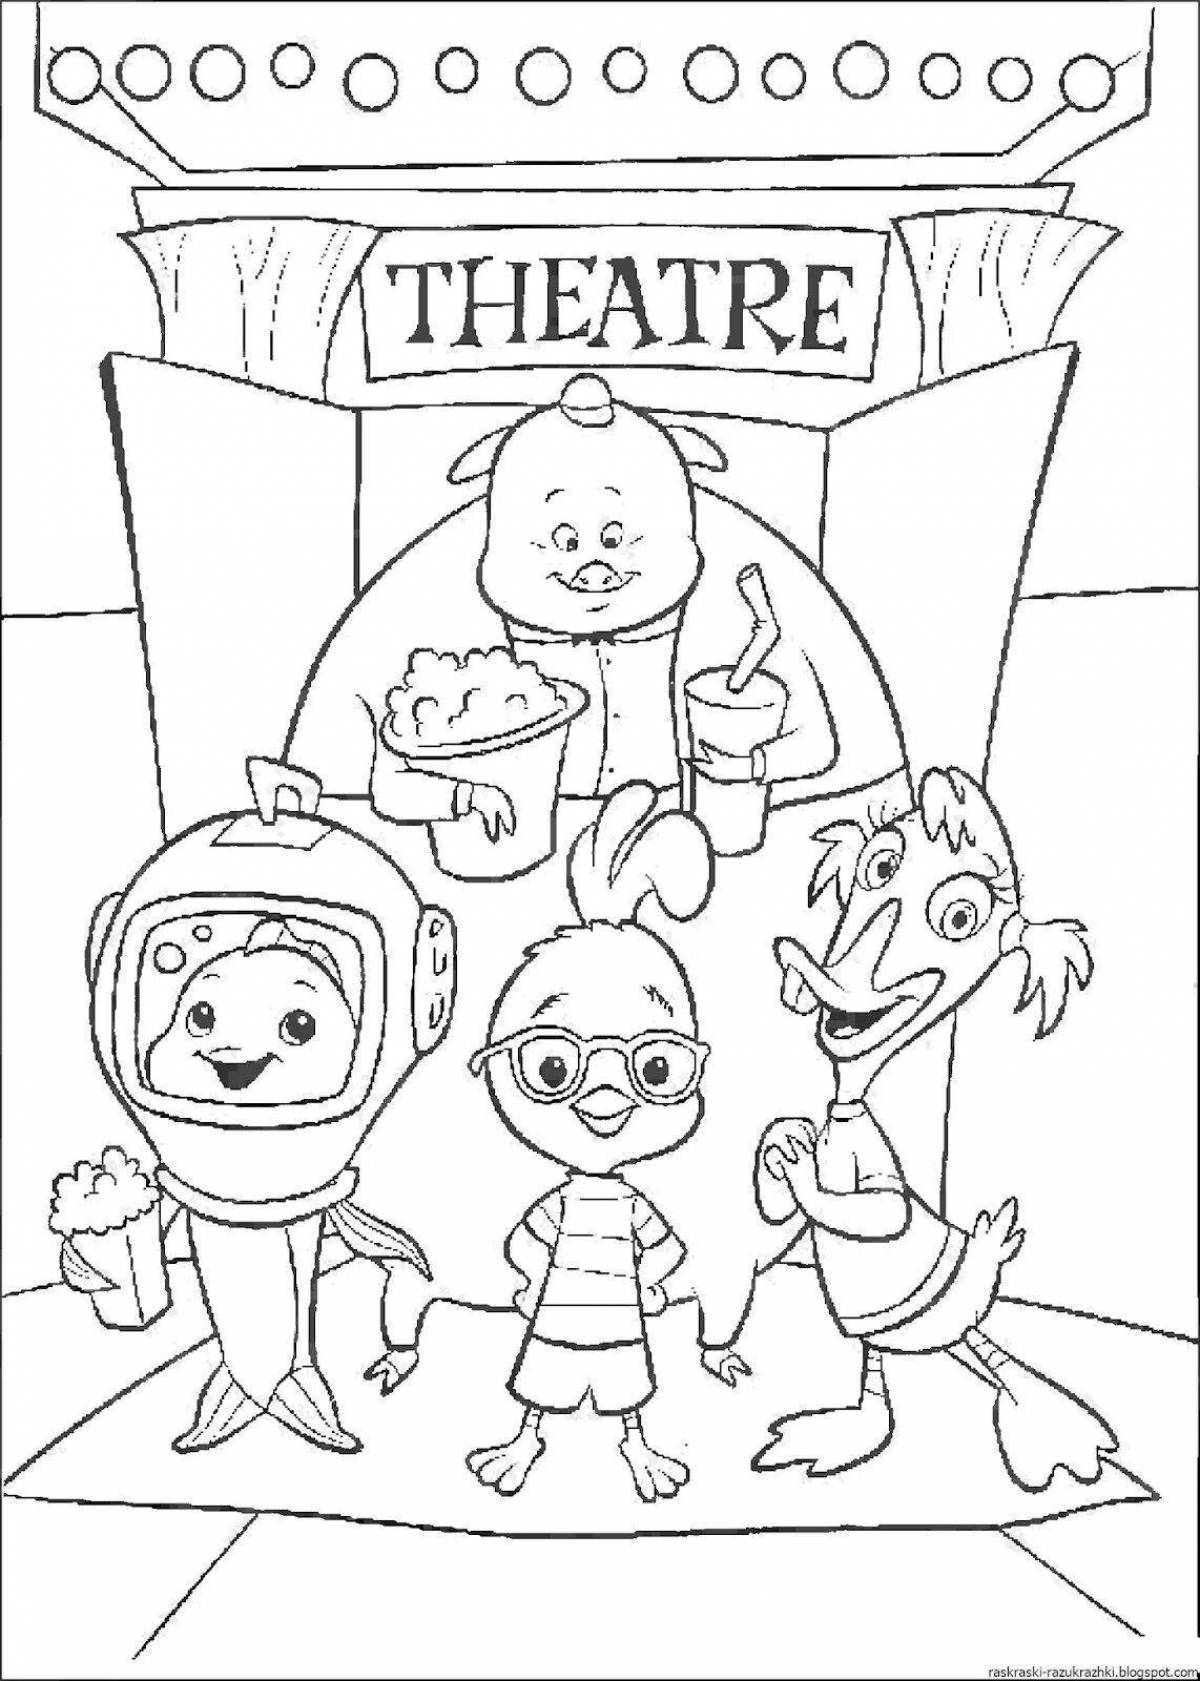 Bright theatrical coloring for kids